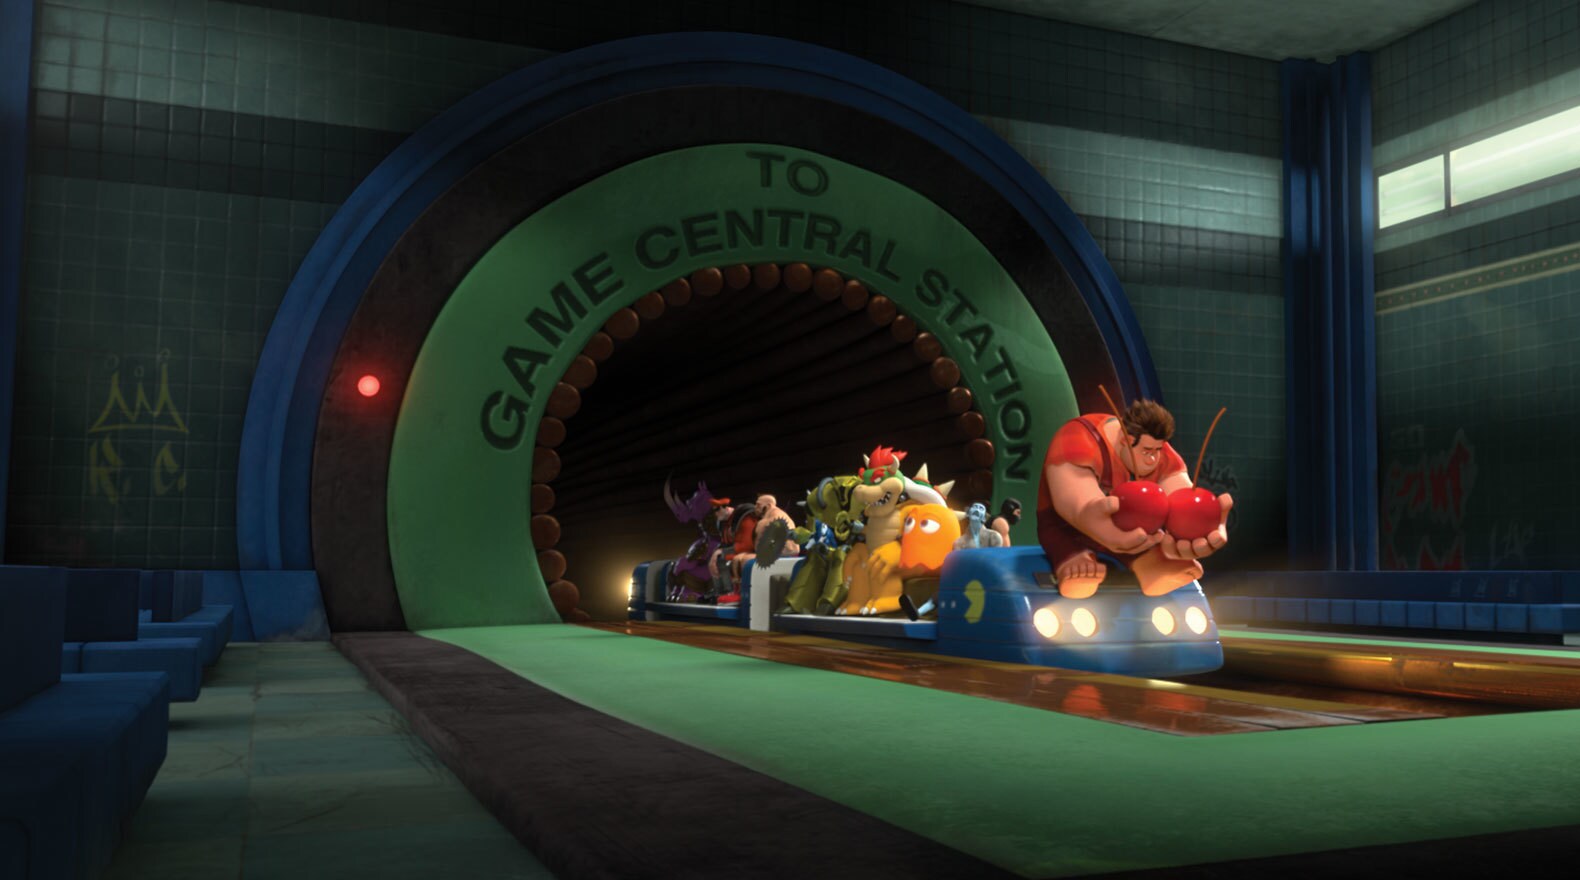 John C. Riley as Ralph, holding two red cherries, on a train at Game Central Station in "Wreck-It Ralph"